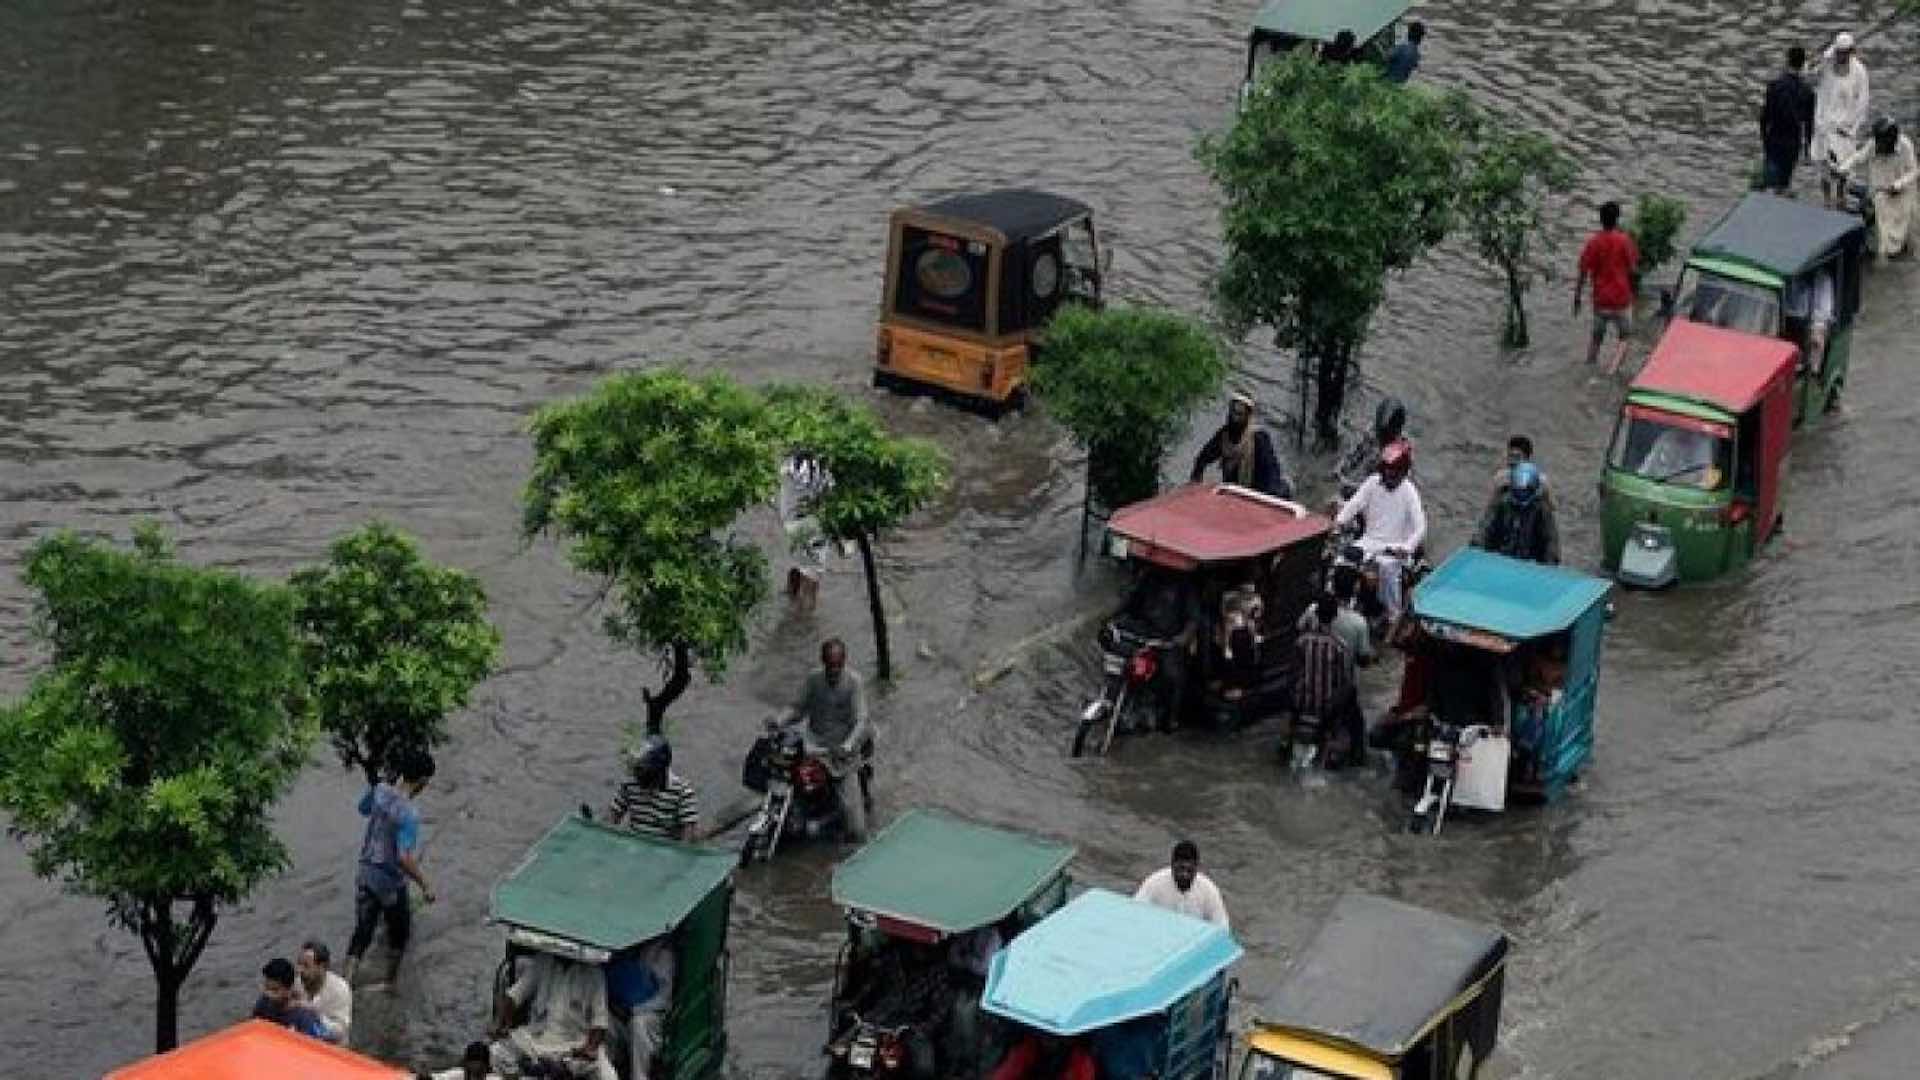 Pakistan declares a national emergency after floods kill over 900